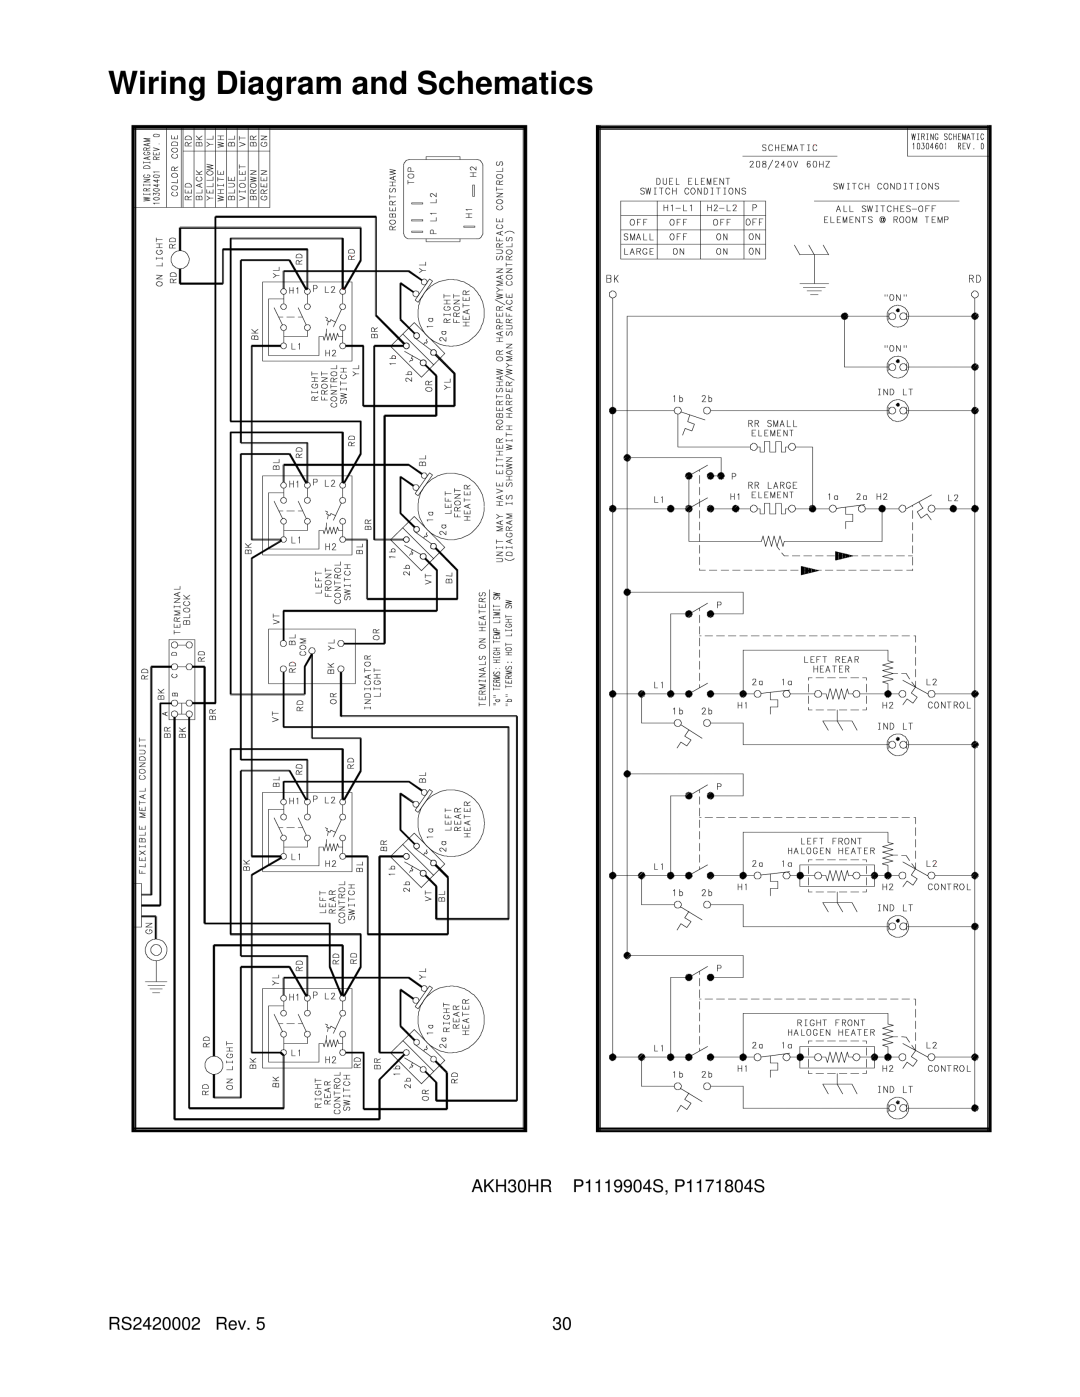 Amana AK2T30/36E1/W1, AK2H30, AK2H36E2, AK2HW2 Wiring Diagram and Schematics, AKH30HR P1119904S, P1171804S, RS2420002 Rev 